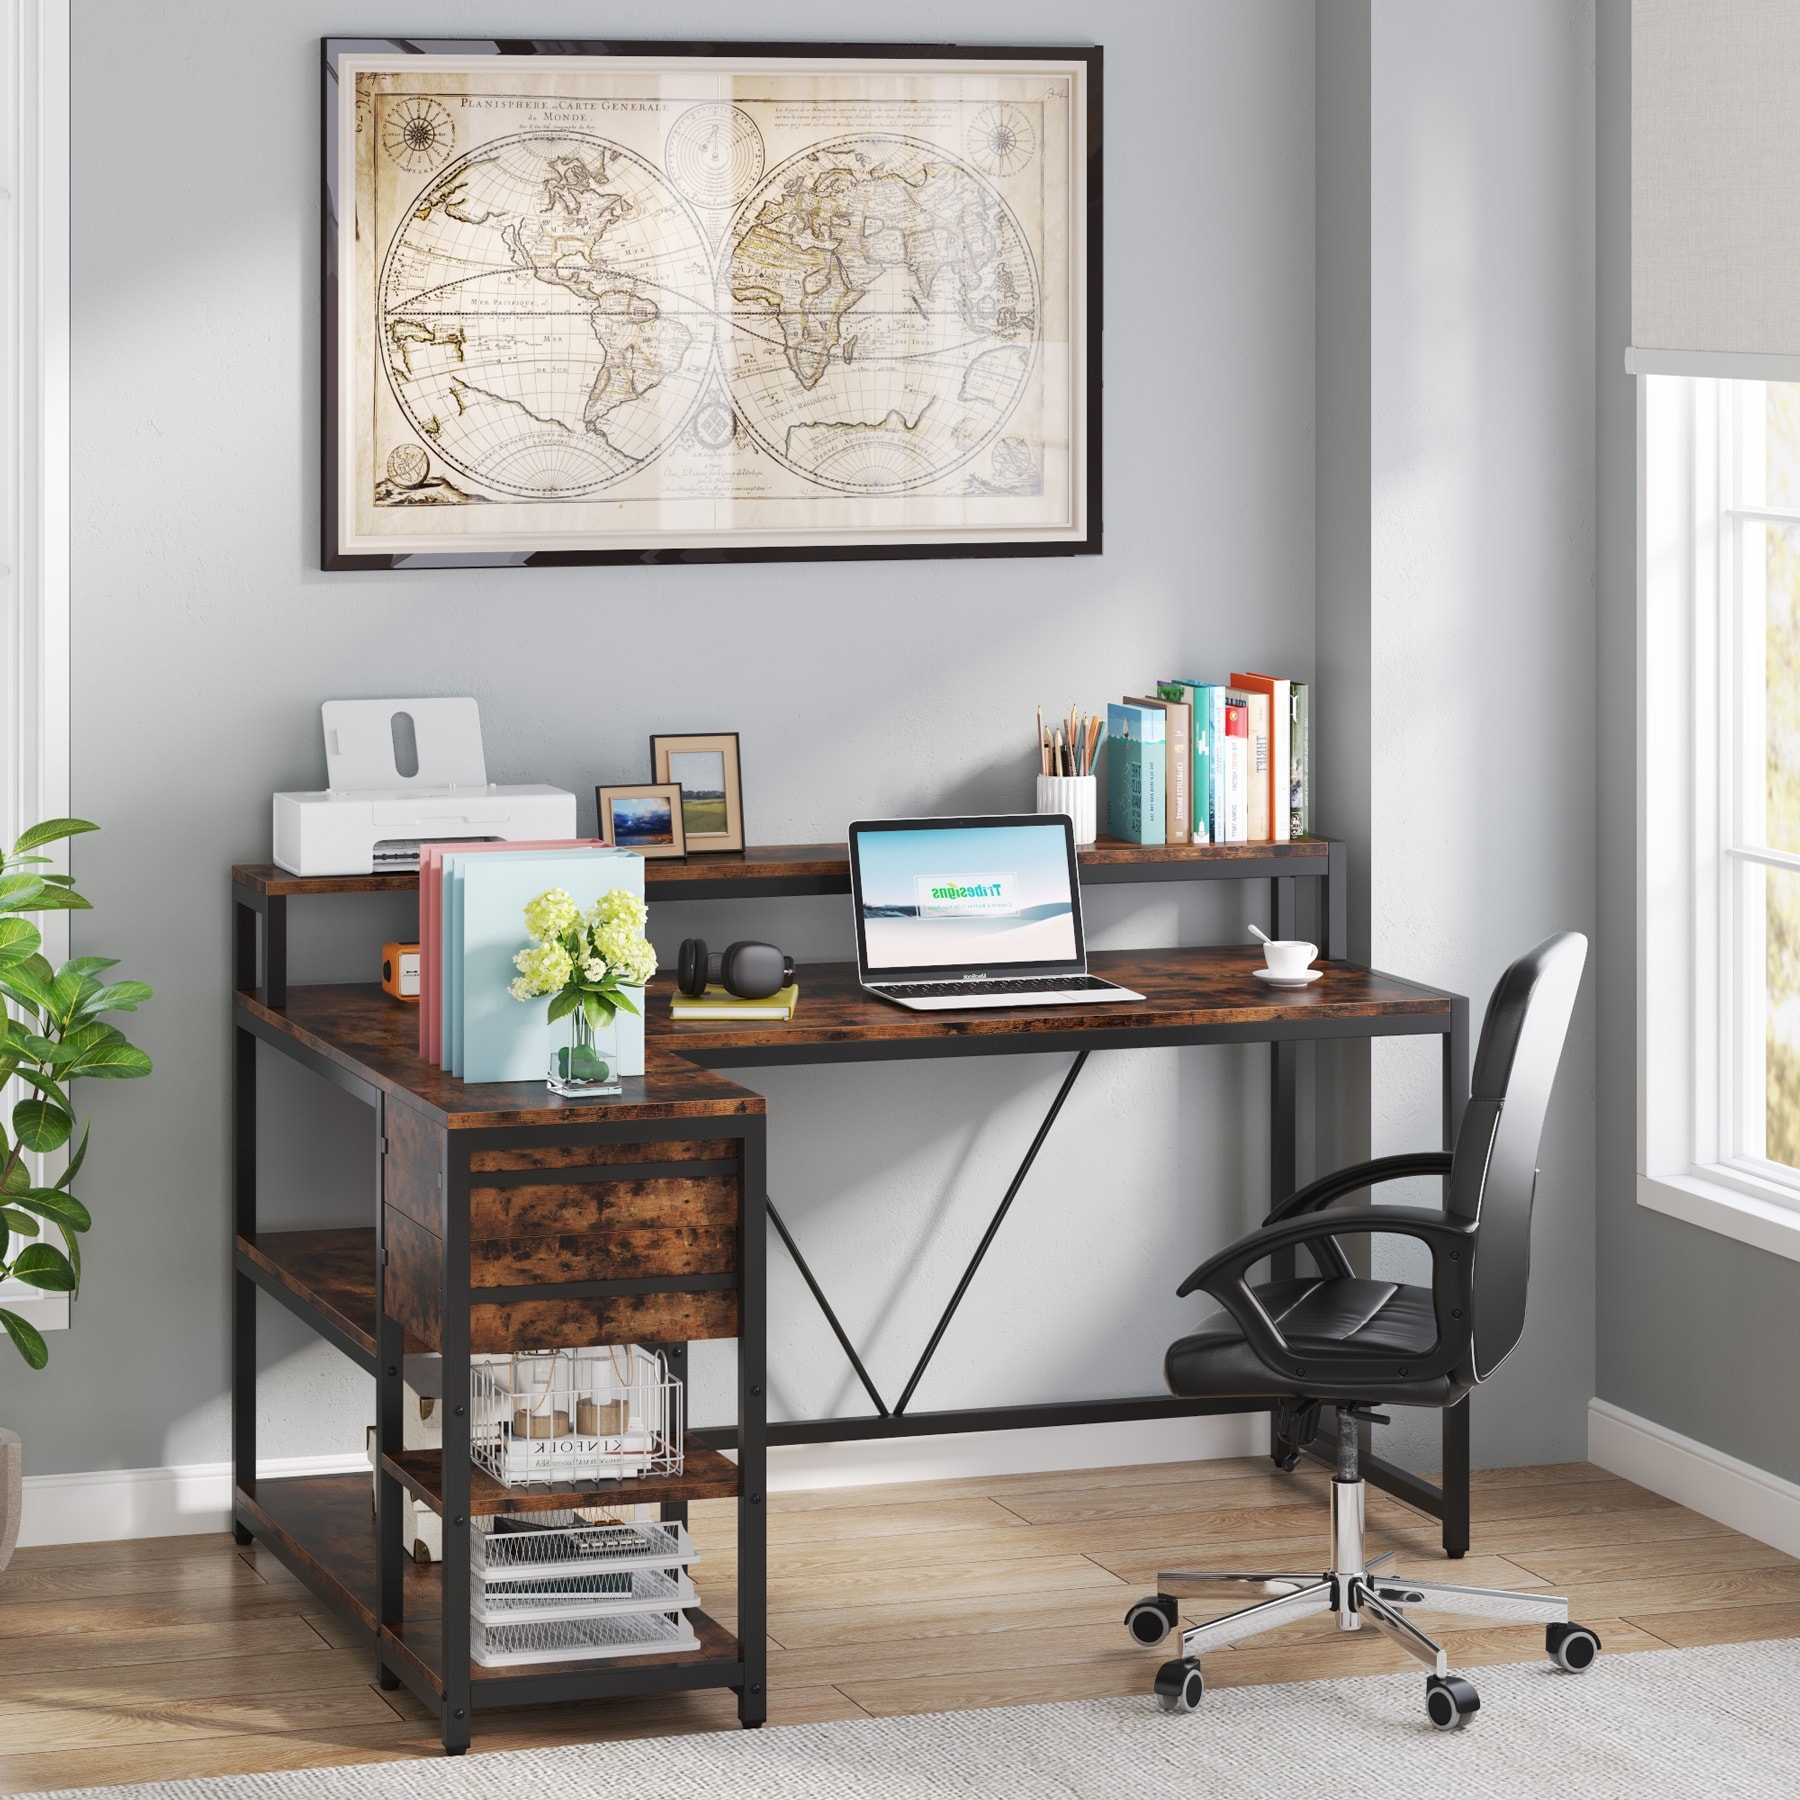 https://ak1.ostkcdn.com/images/products/is/images/direct/c9655ad1f5e8334d28dd456e7debd827896ff8f3/L-Shaped-Desk-with-Drawer%2C-Home-Office-Corner-Desk-with-Storage-Shelves-and-Monitor-Stand%2C-Rustic-PC-Desk-for-Small-Space.jpg